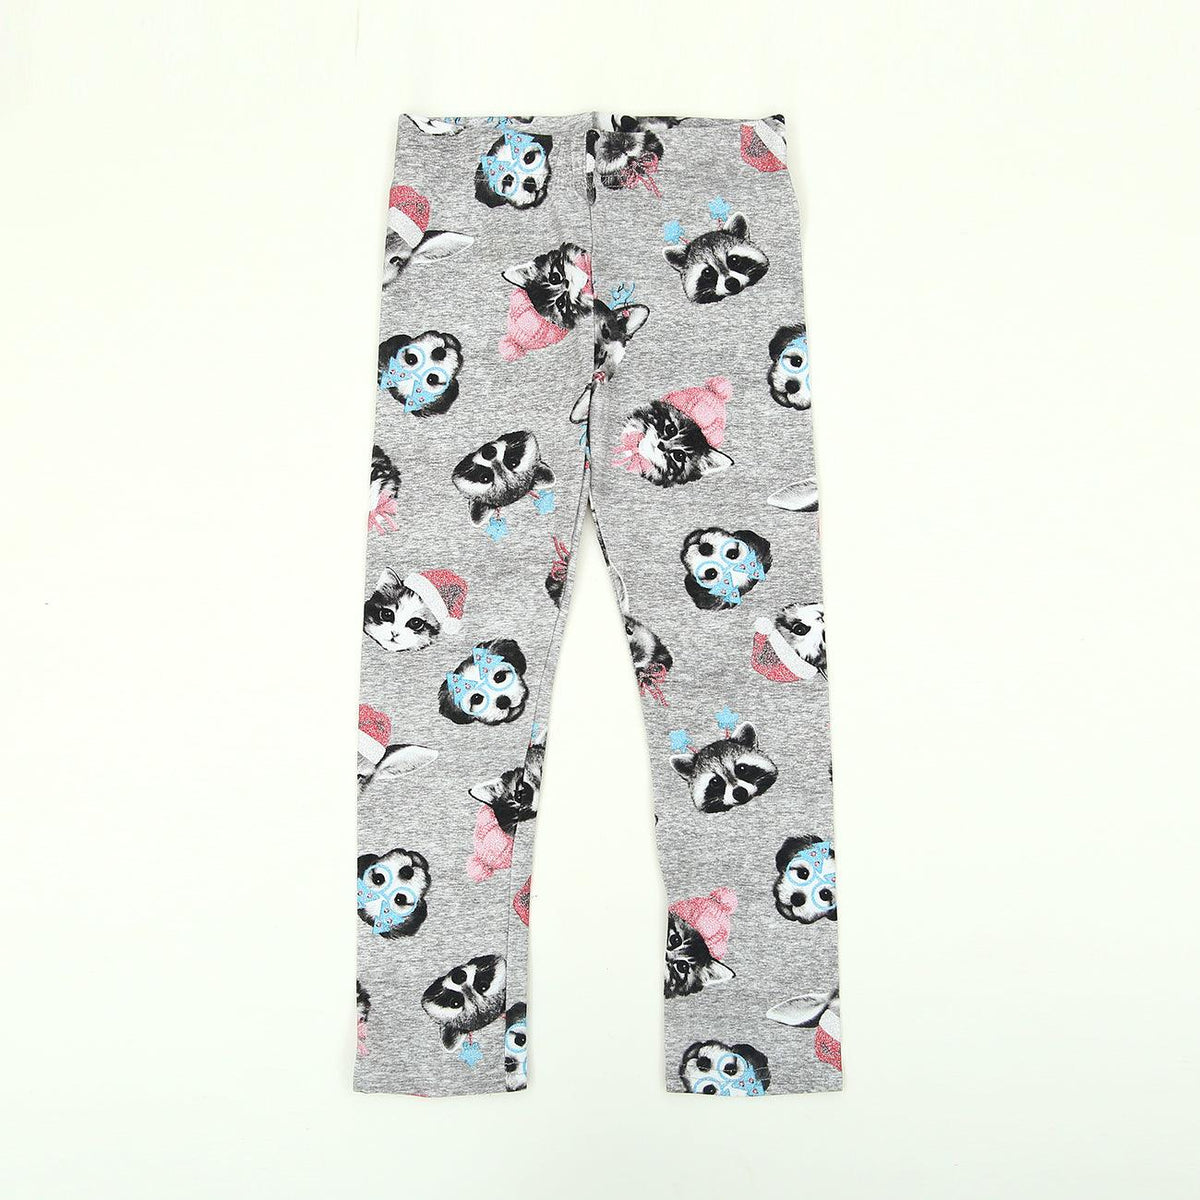 Imported All-Over Printed Soft Cotton Legging For Girls 3 YRS - 6 YRS (LE-11590) - Brands River